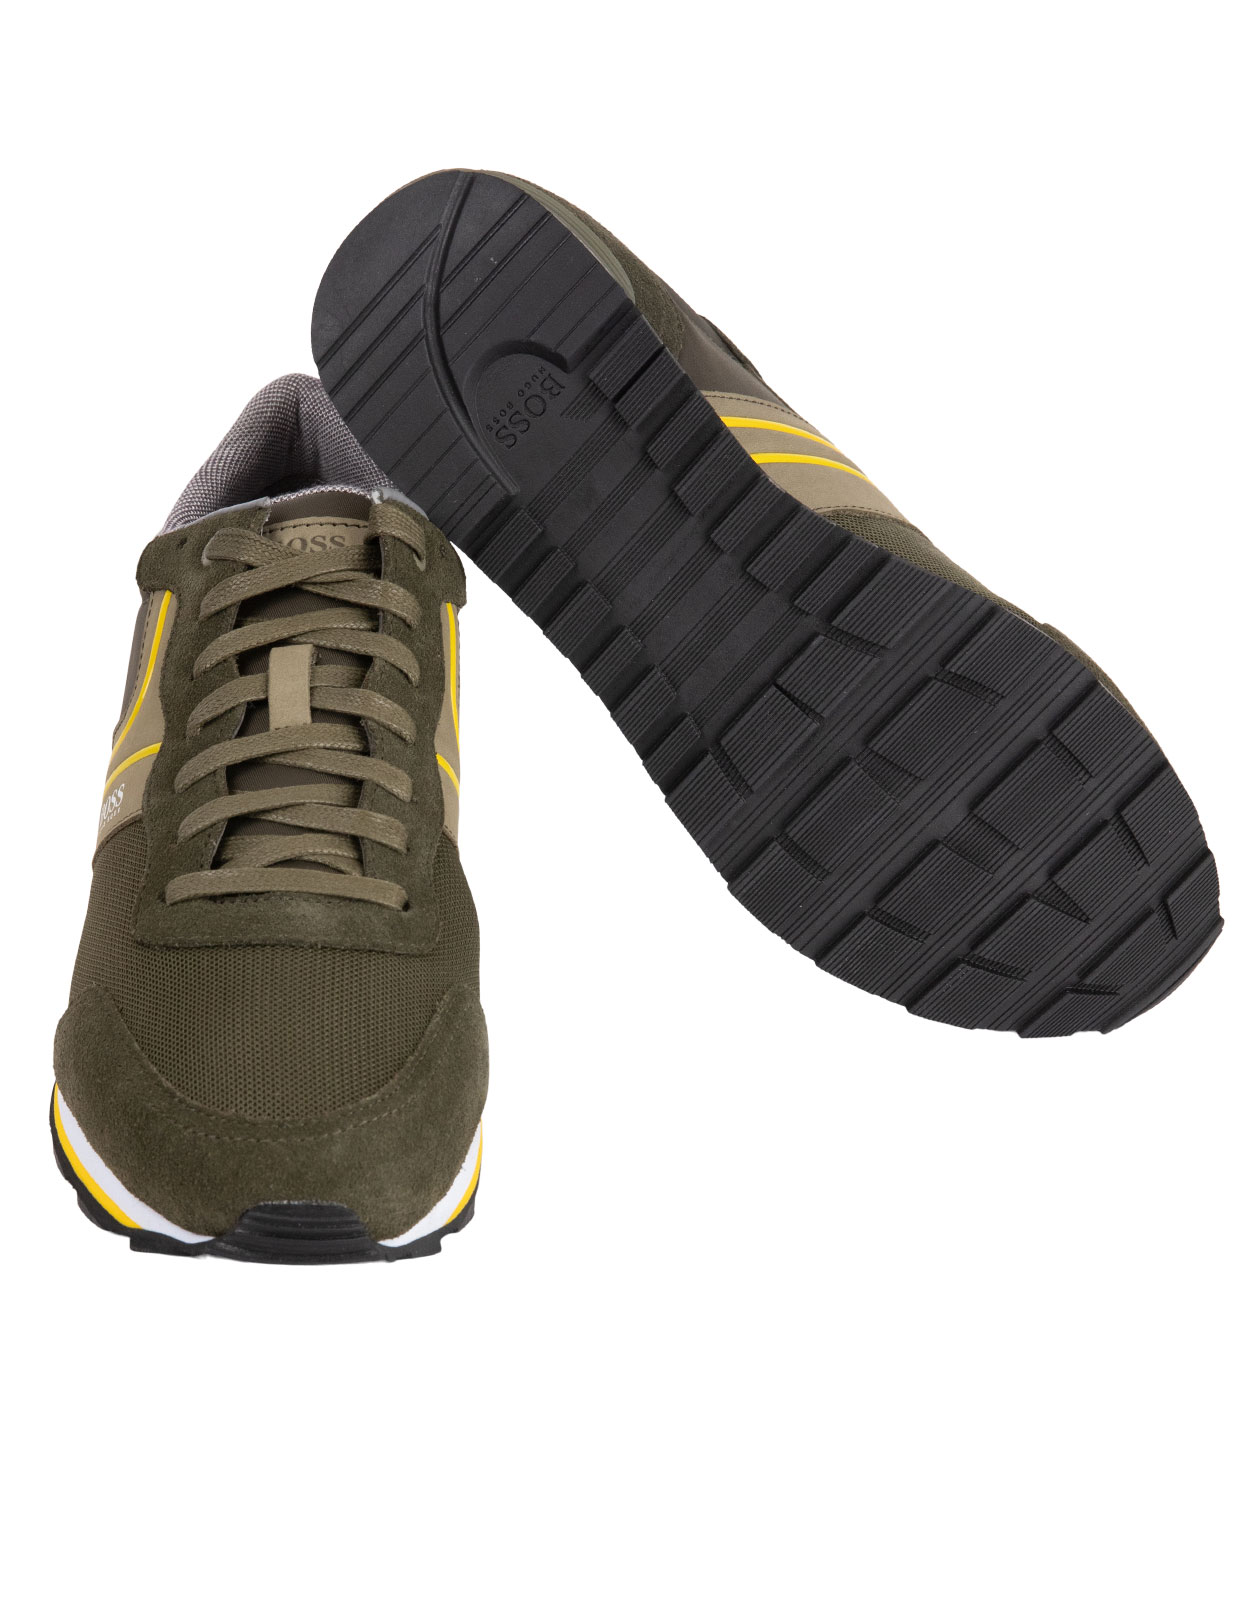 Running Style Trainers Suede Mesh Open Green Stl 42